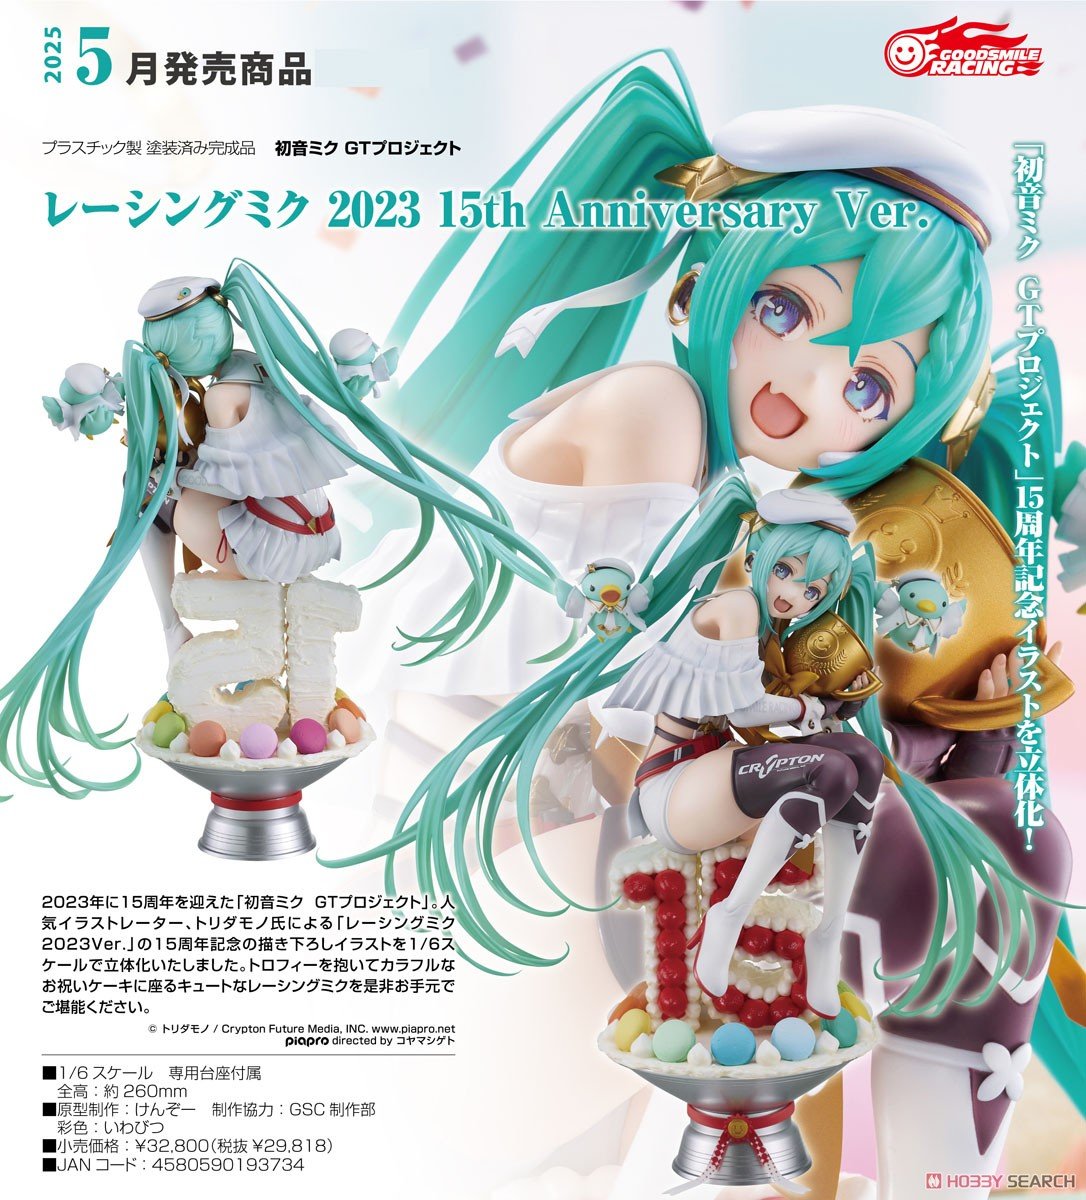 SheetNo:76213 #賽車初音(2023)15th Anni Ver=1/6 初音未來GT Project 